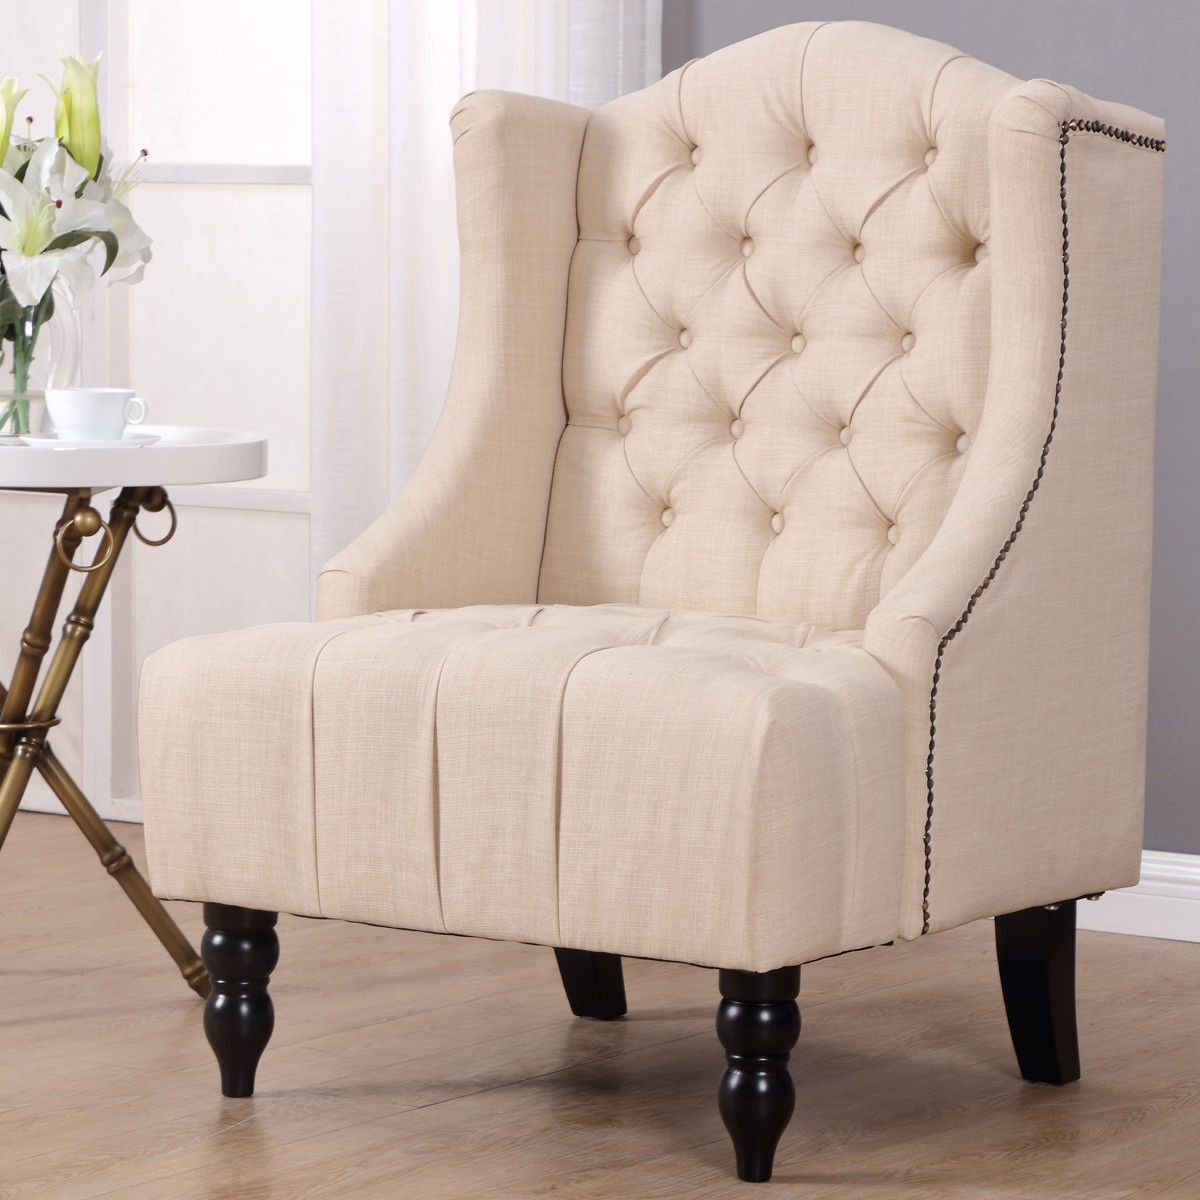 Wingback Living Room Chairs
 Giantex Modern Tall Wing Back Tufted Accent Armchair